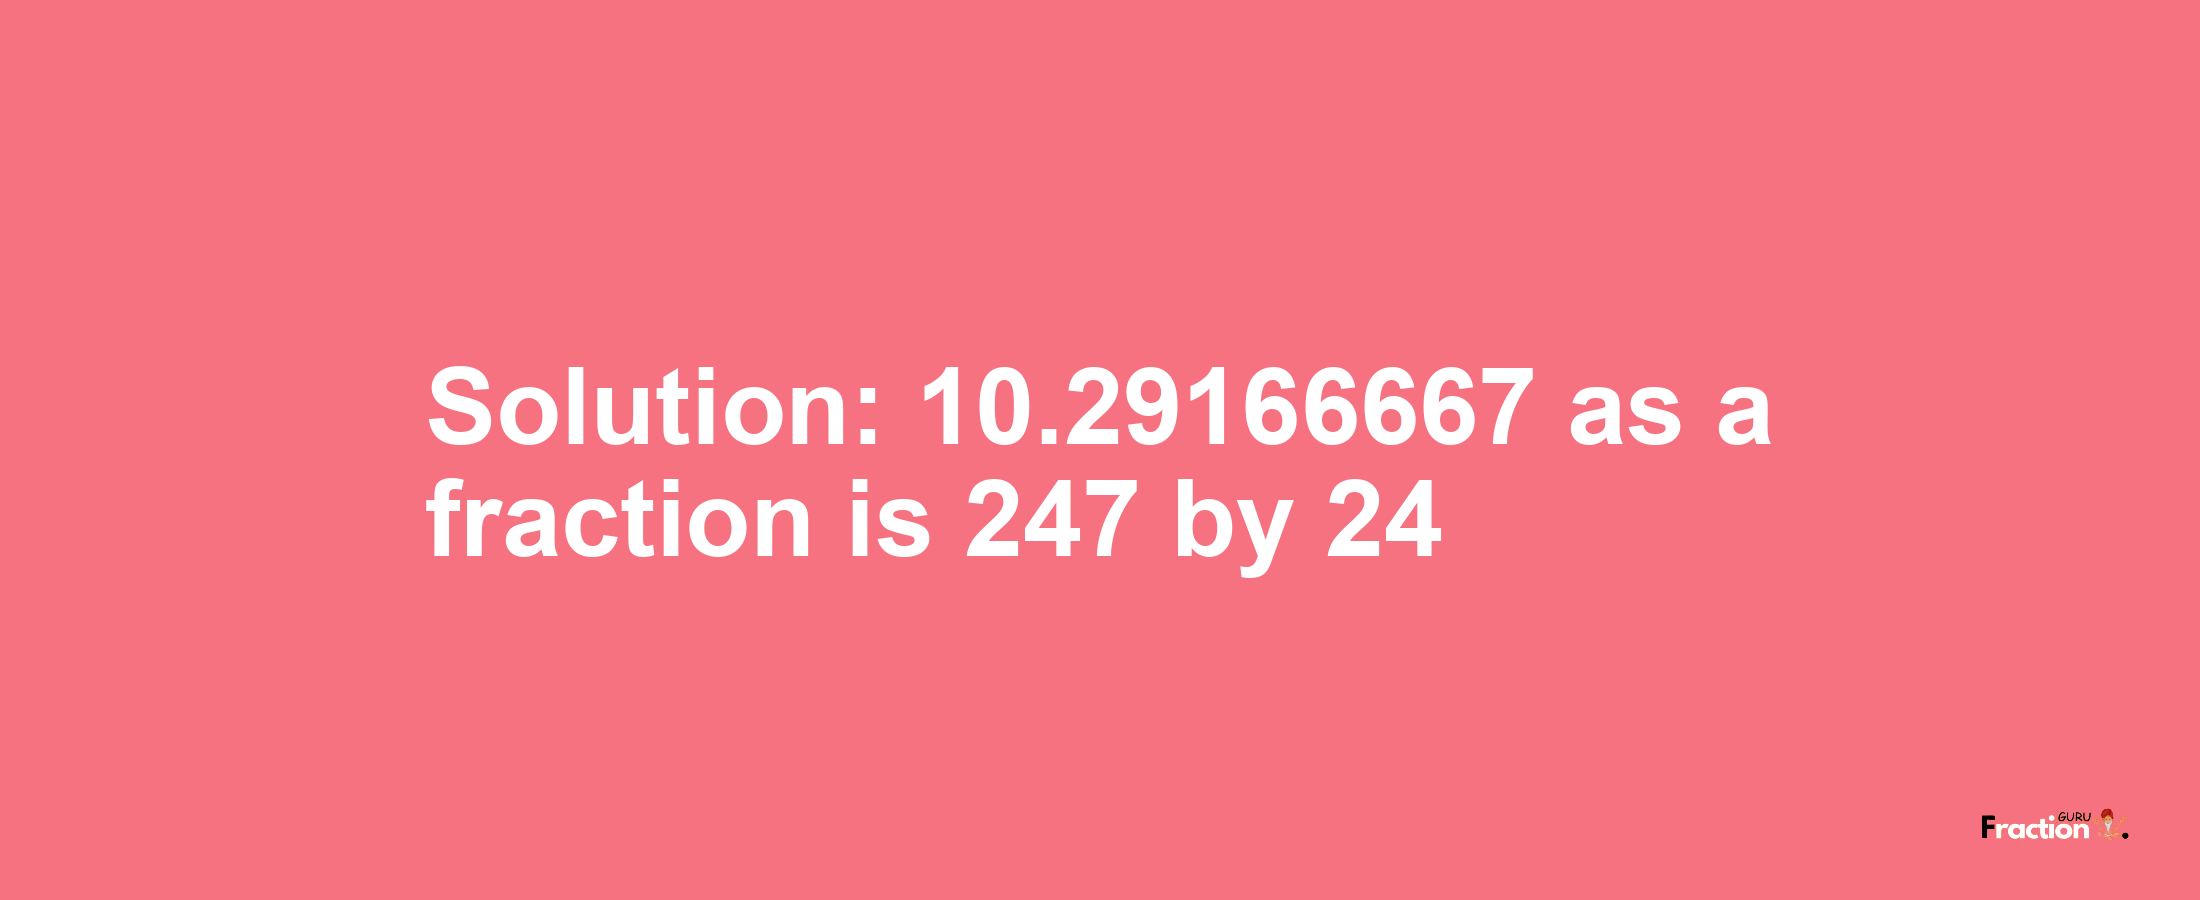 Solution:10.29166667 as a fraction is 247/24